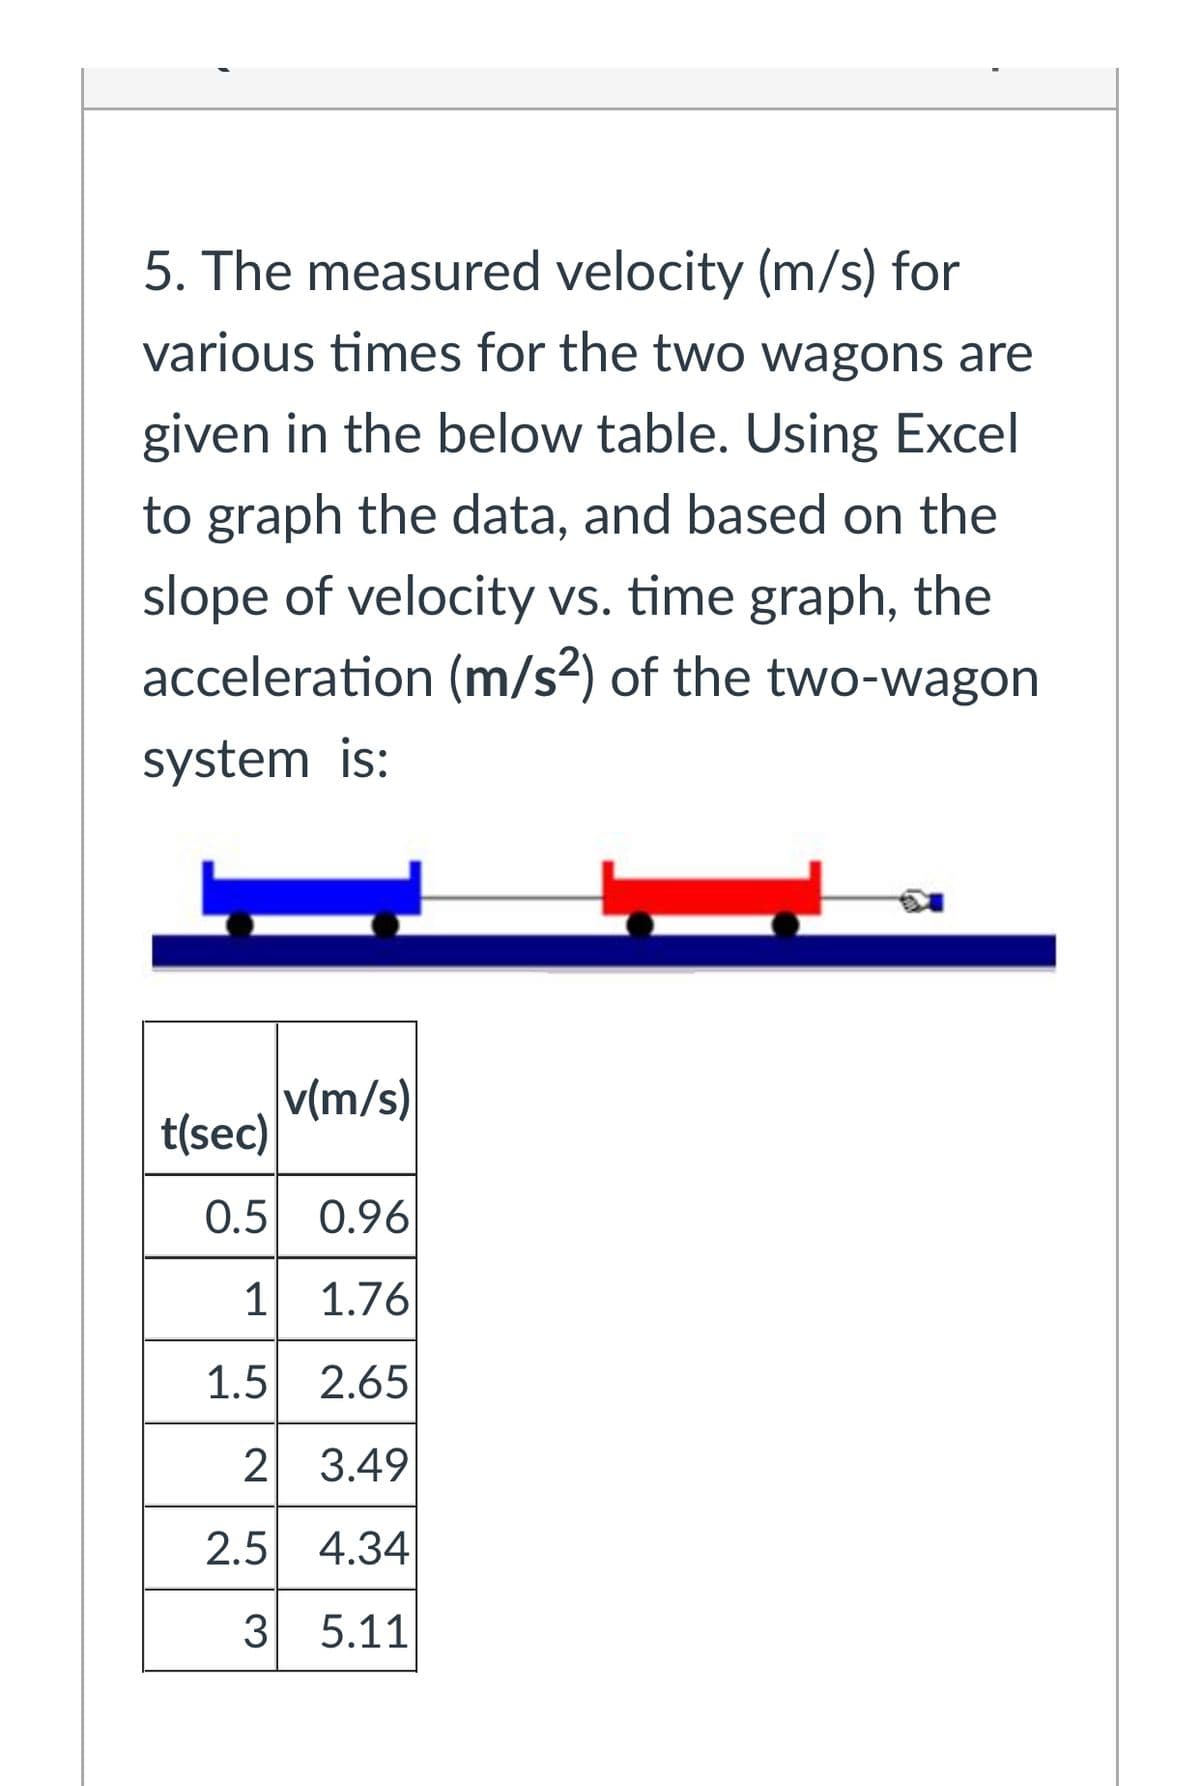 5. The measured velocity (m/s) for
various times for the two wagons are
given in the below table. Using Excel
to graph the data, and based on the
slope of velocity vs. time graph, the
acceleration (m/s²) of the two-wagon
system is:
v(m/s)
t(sec)
0.5 0.96
1
1.76
1.5 2.65
2 3.49
2.5 4.34
3
5.11
